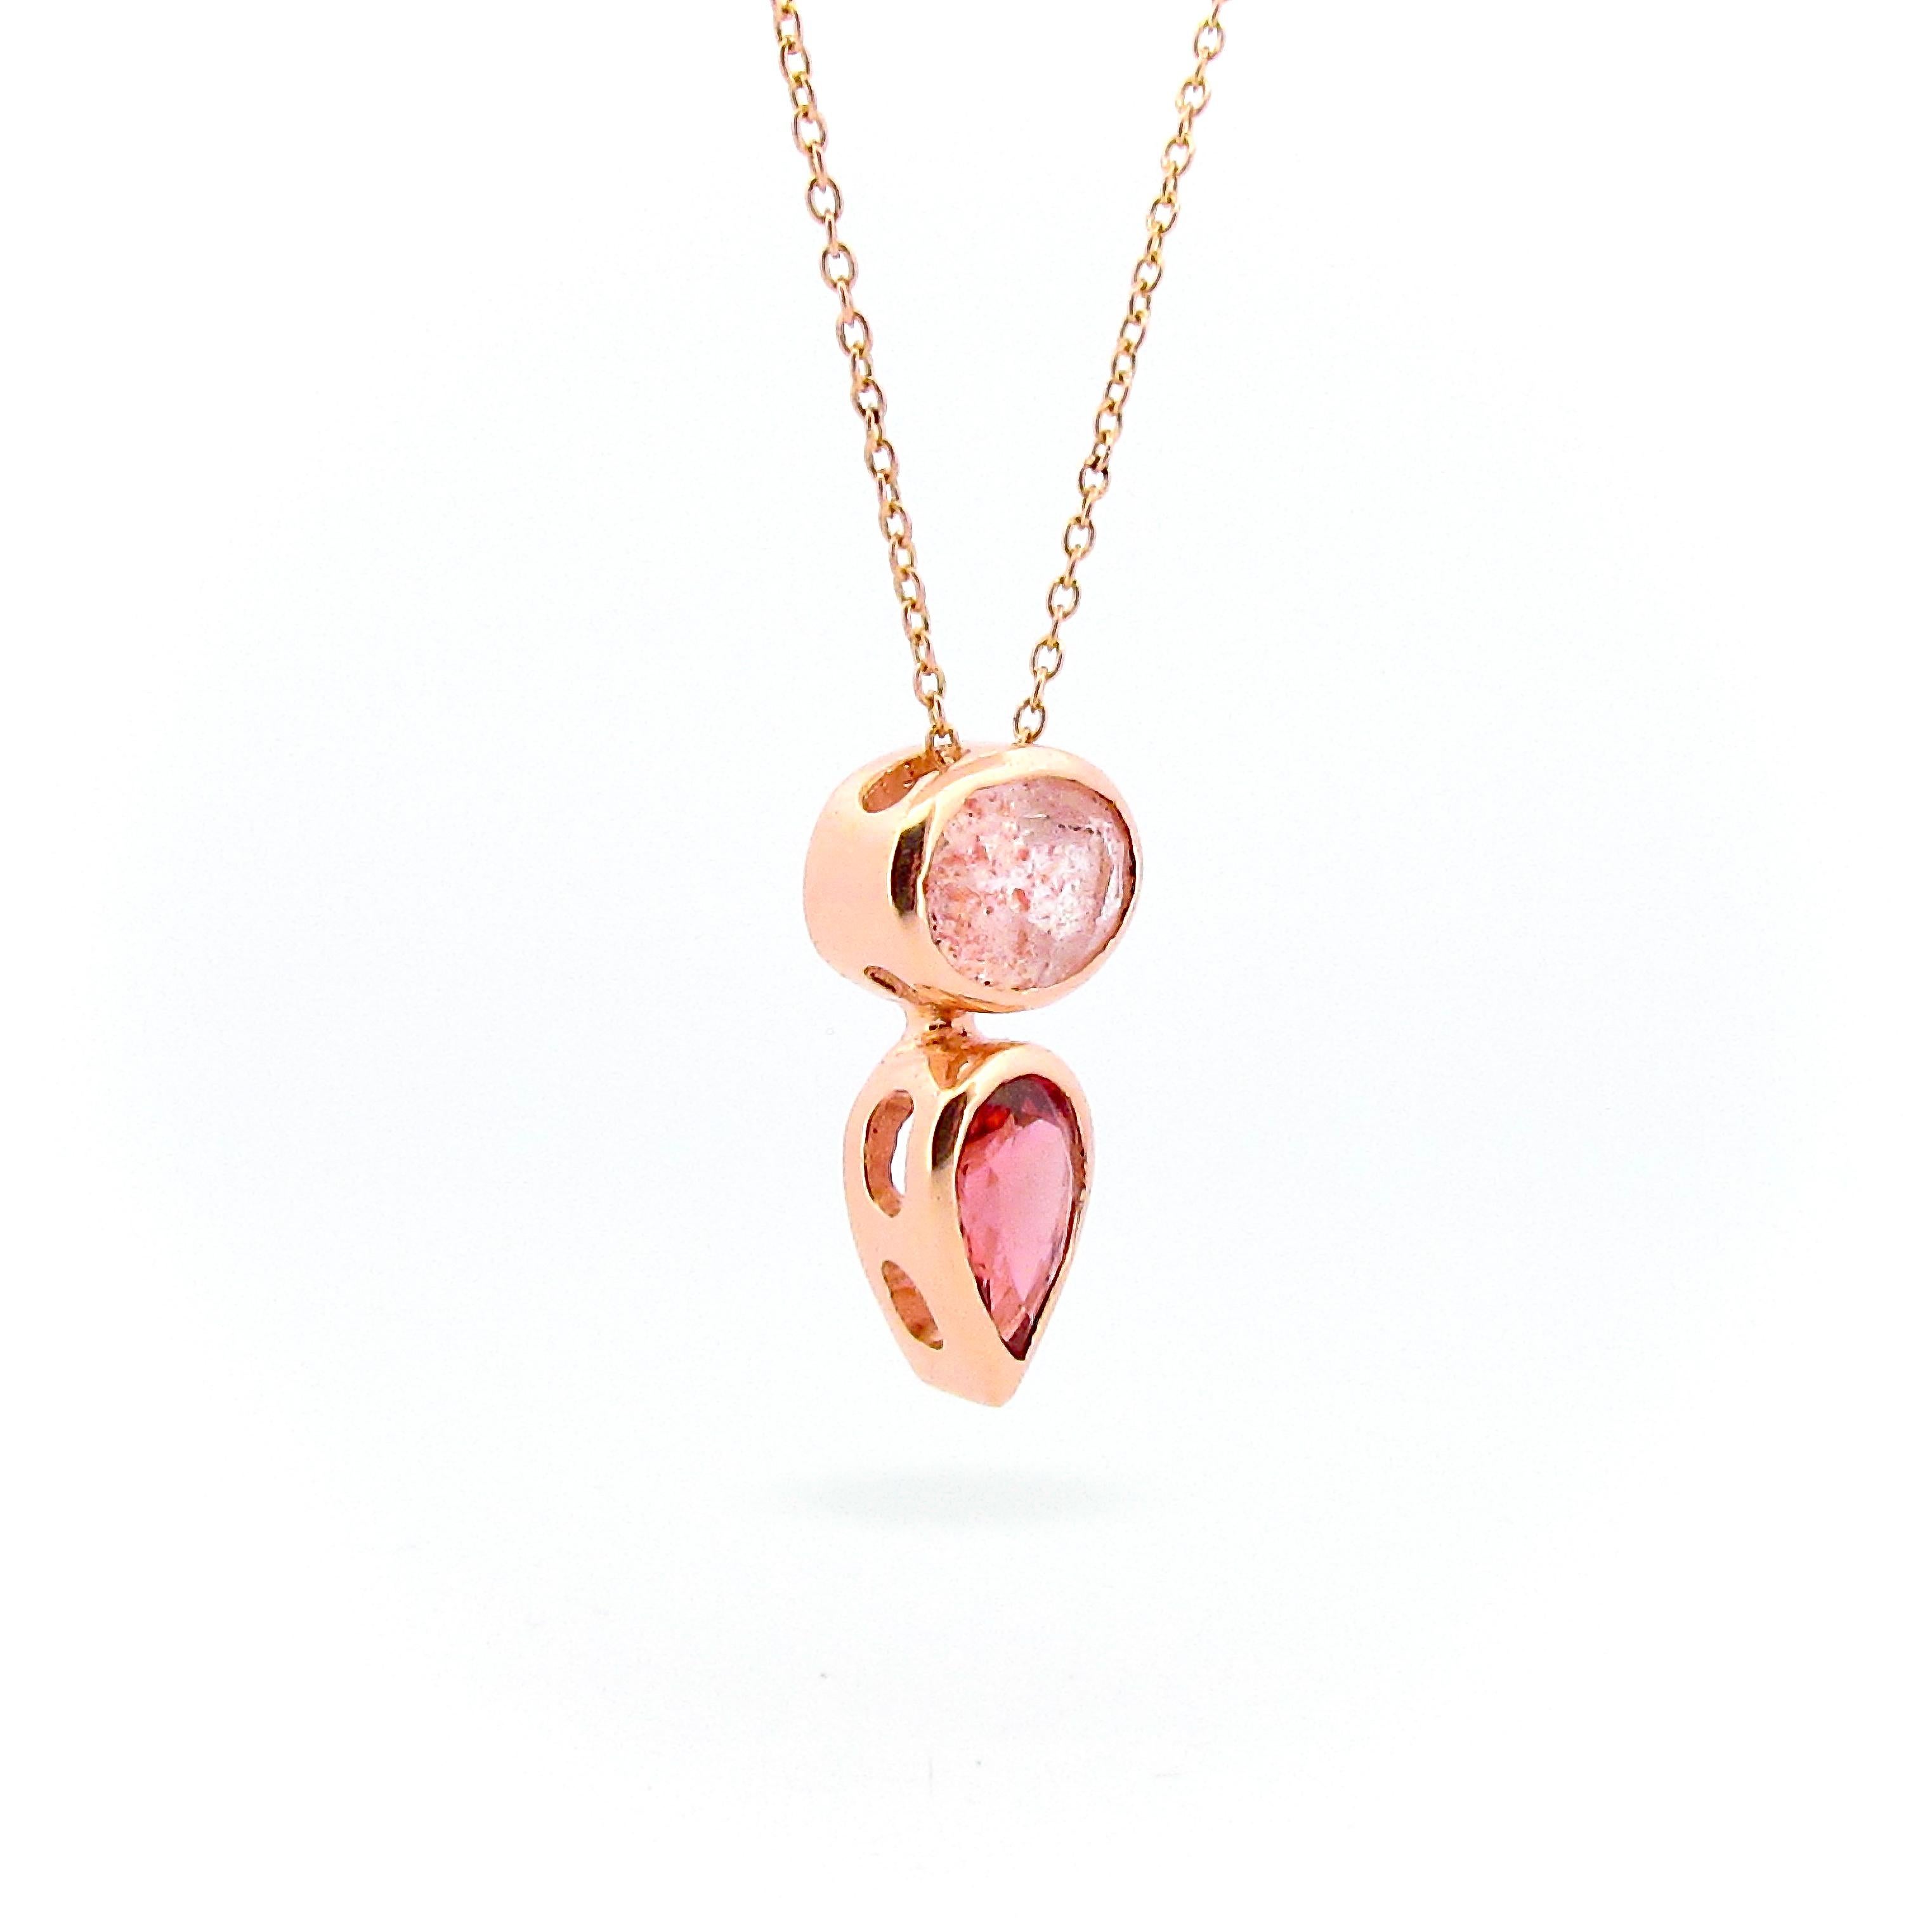 This 9ct solid Gold Balance pendant is set with an usual Oval faceted Strawberry Quartz, and has a beautiful Pink Pear shaped Tourmaline dropping off it, it slides beautifully on a solid 9ct rose gold 50cm/20inch delicate cable chain.   The dark and